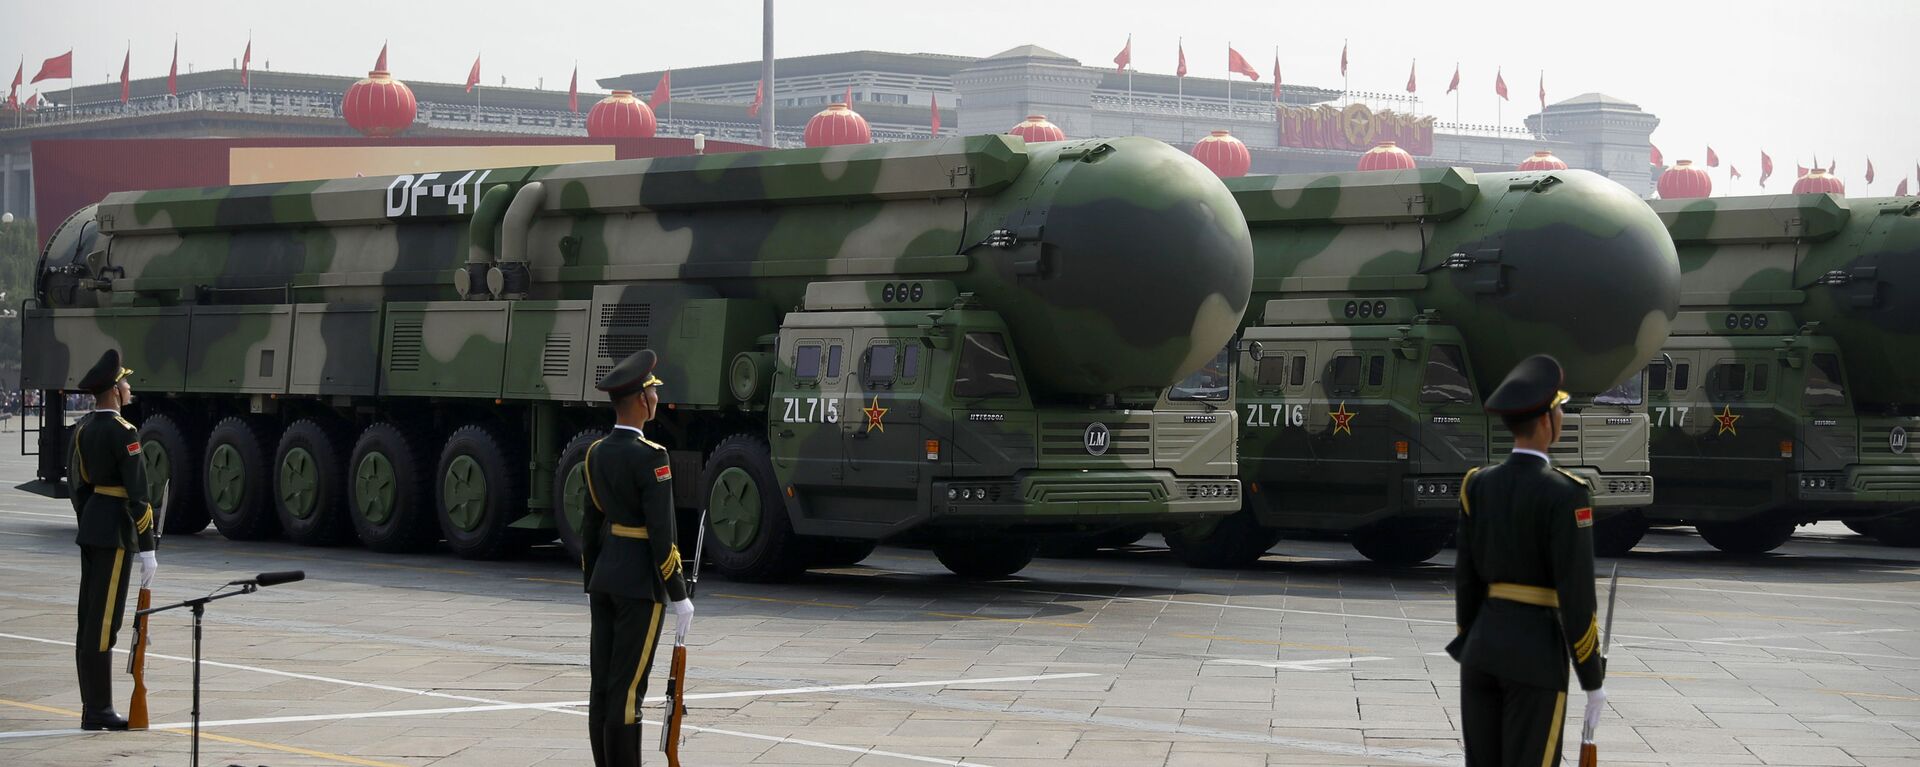 Chinese military vehicles carrying DF-41 ballistic missiles roll during a parade to commemorate the 70th anniversary of the founding of Communist China in Beijing, Tuesday, Oct. 1, 2019 - Sputnik International, 1920, 02.07.2021